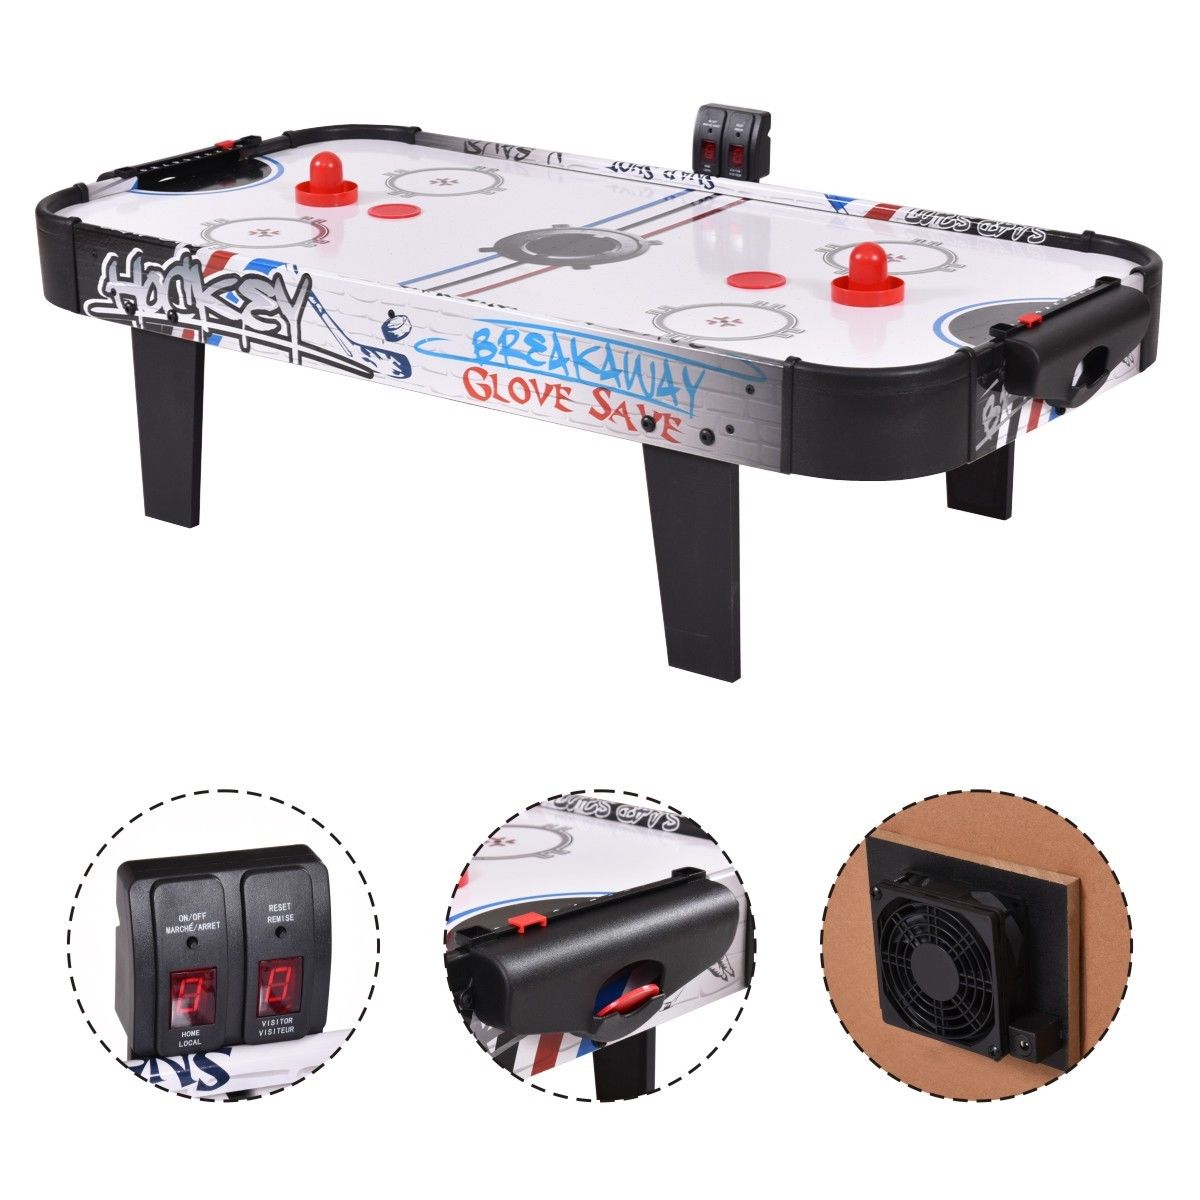 Costway 42''Air Powered Hockey Table Game Room Indoor Sport Electronic Scoring 2 Pushers - image 1 of 9